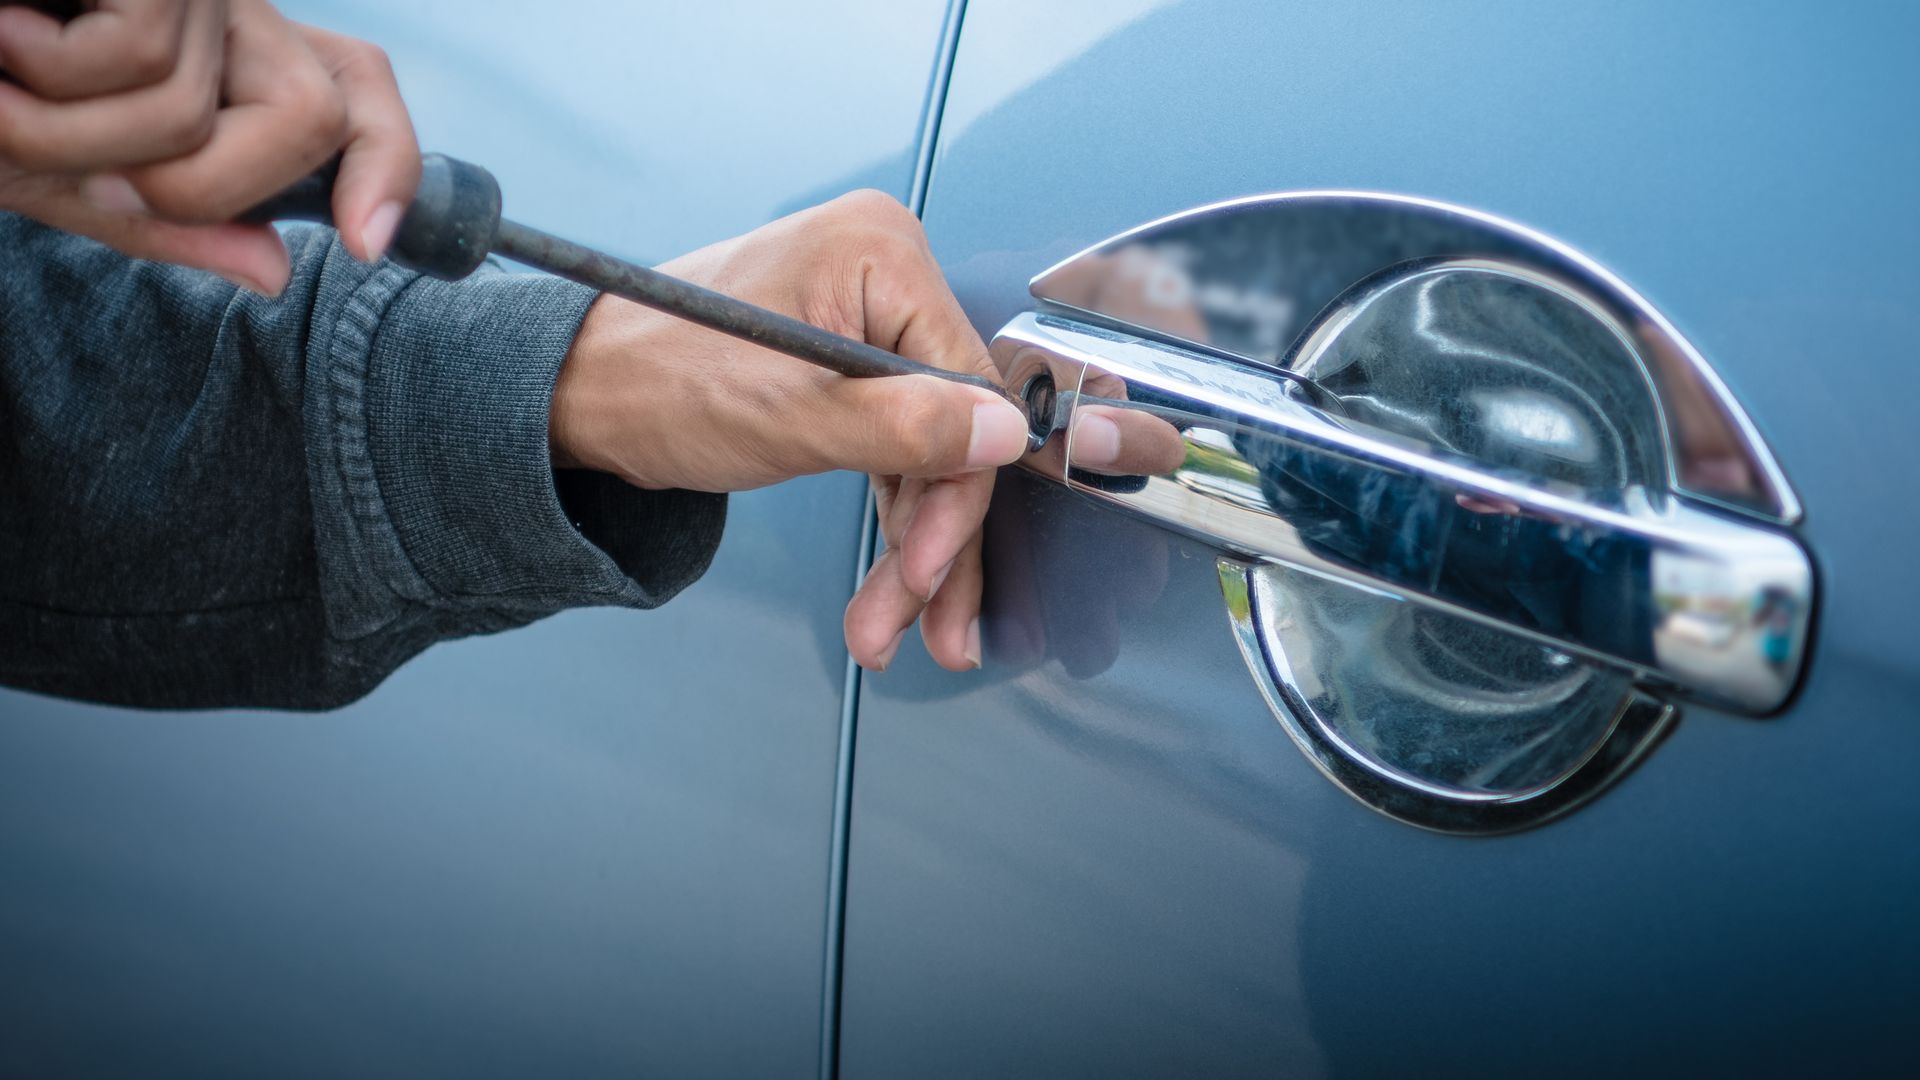 According to the National Insurance Crime Bureau (NICB), there were more than 1 million car thefts reported in the United States in 2022.